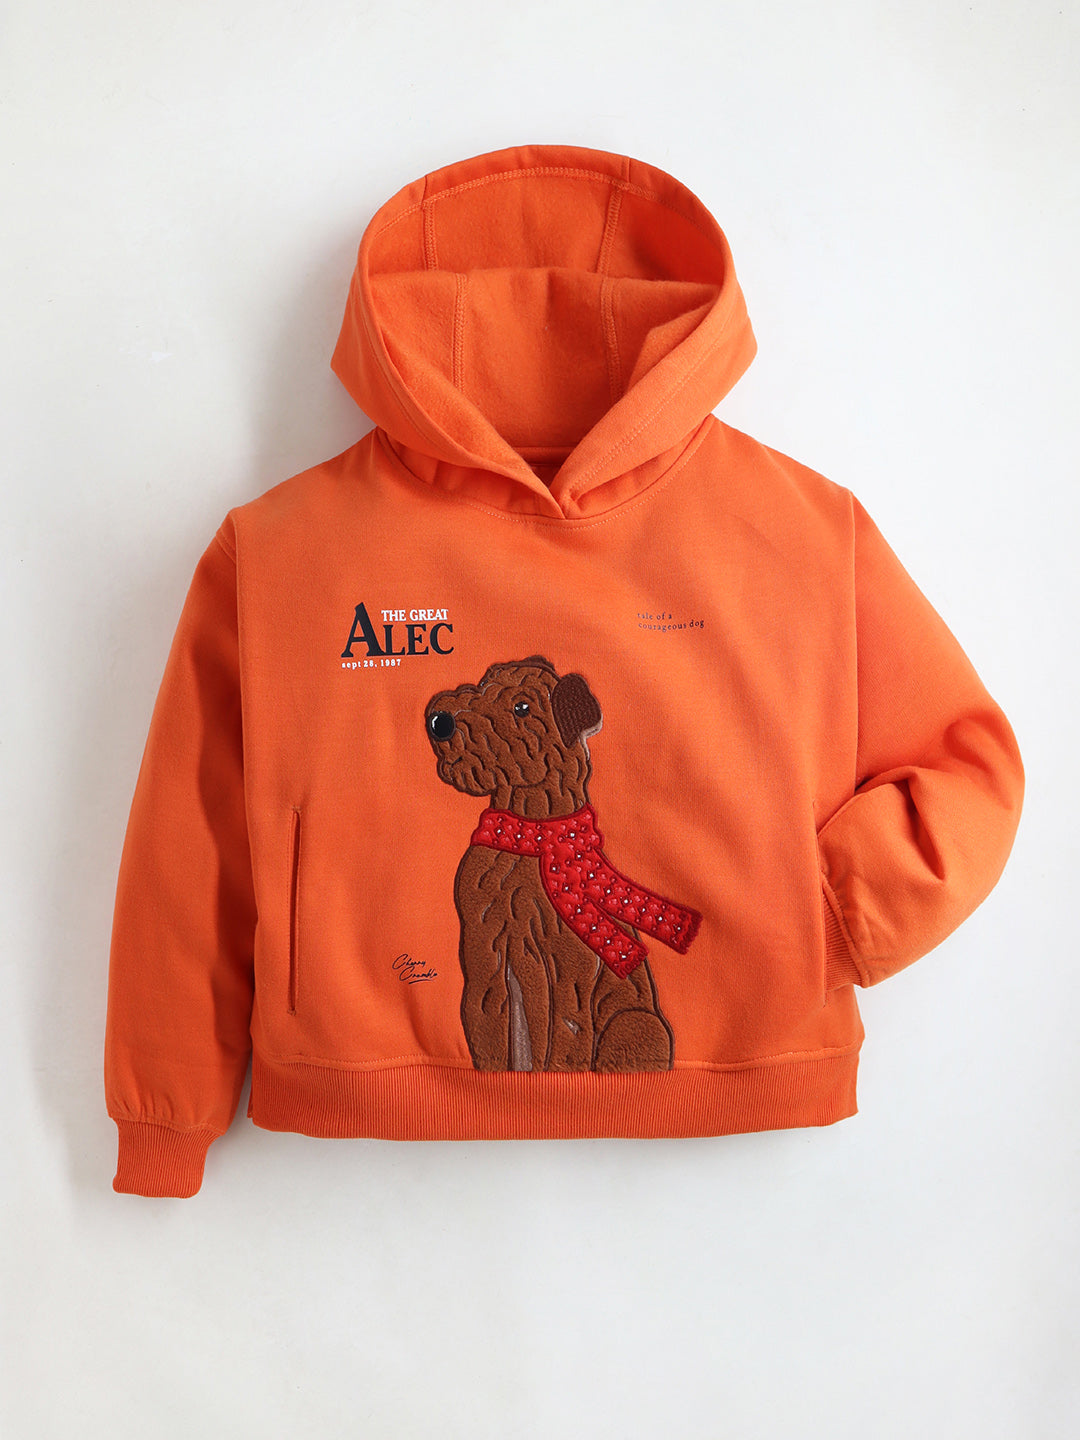 Vibrant Orange Unisex Full Sleeve Relax Fit Applique Cropped Hoodie